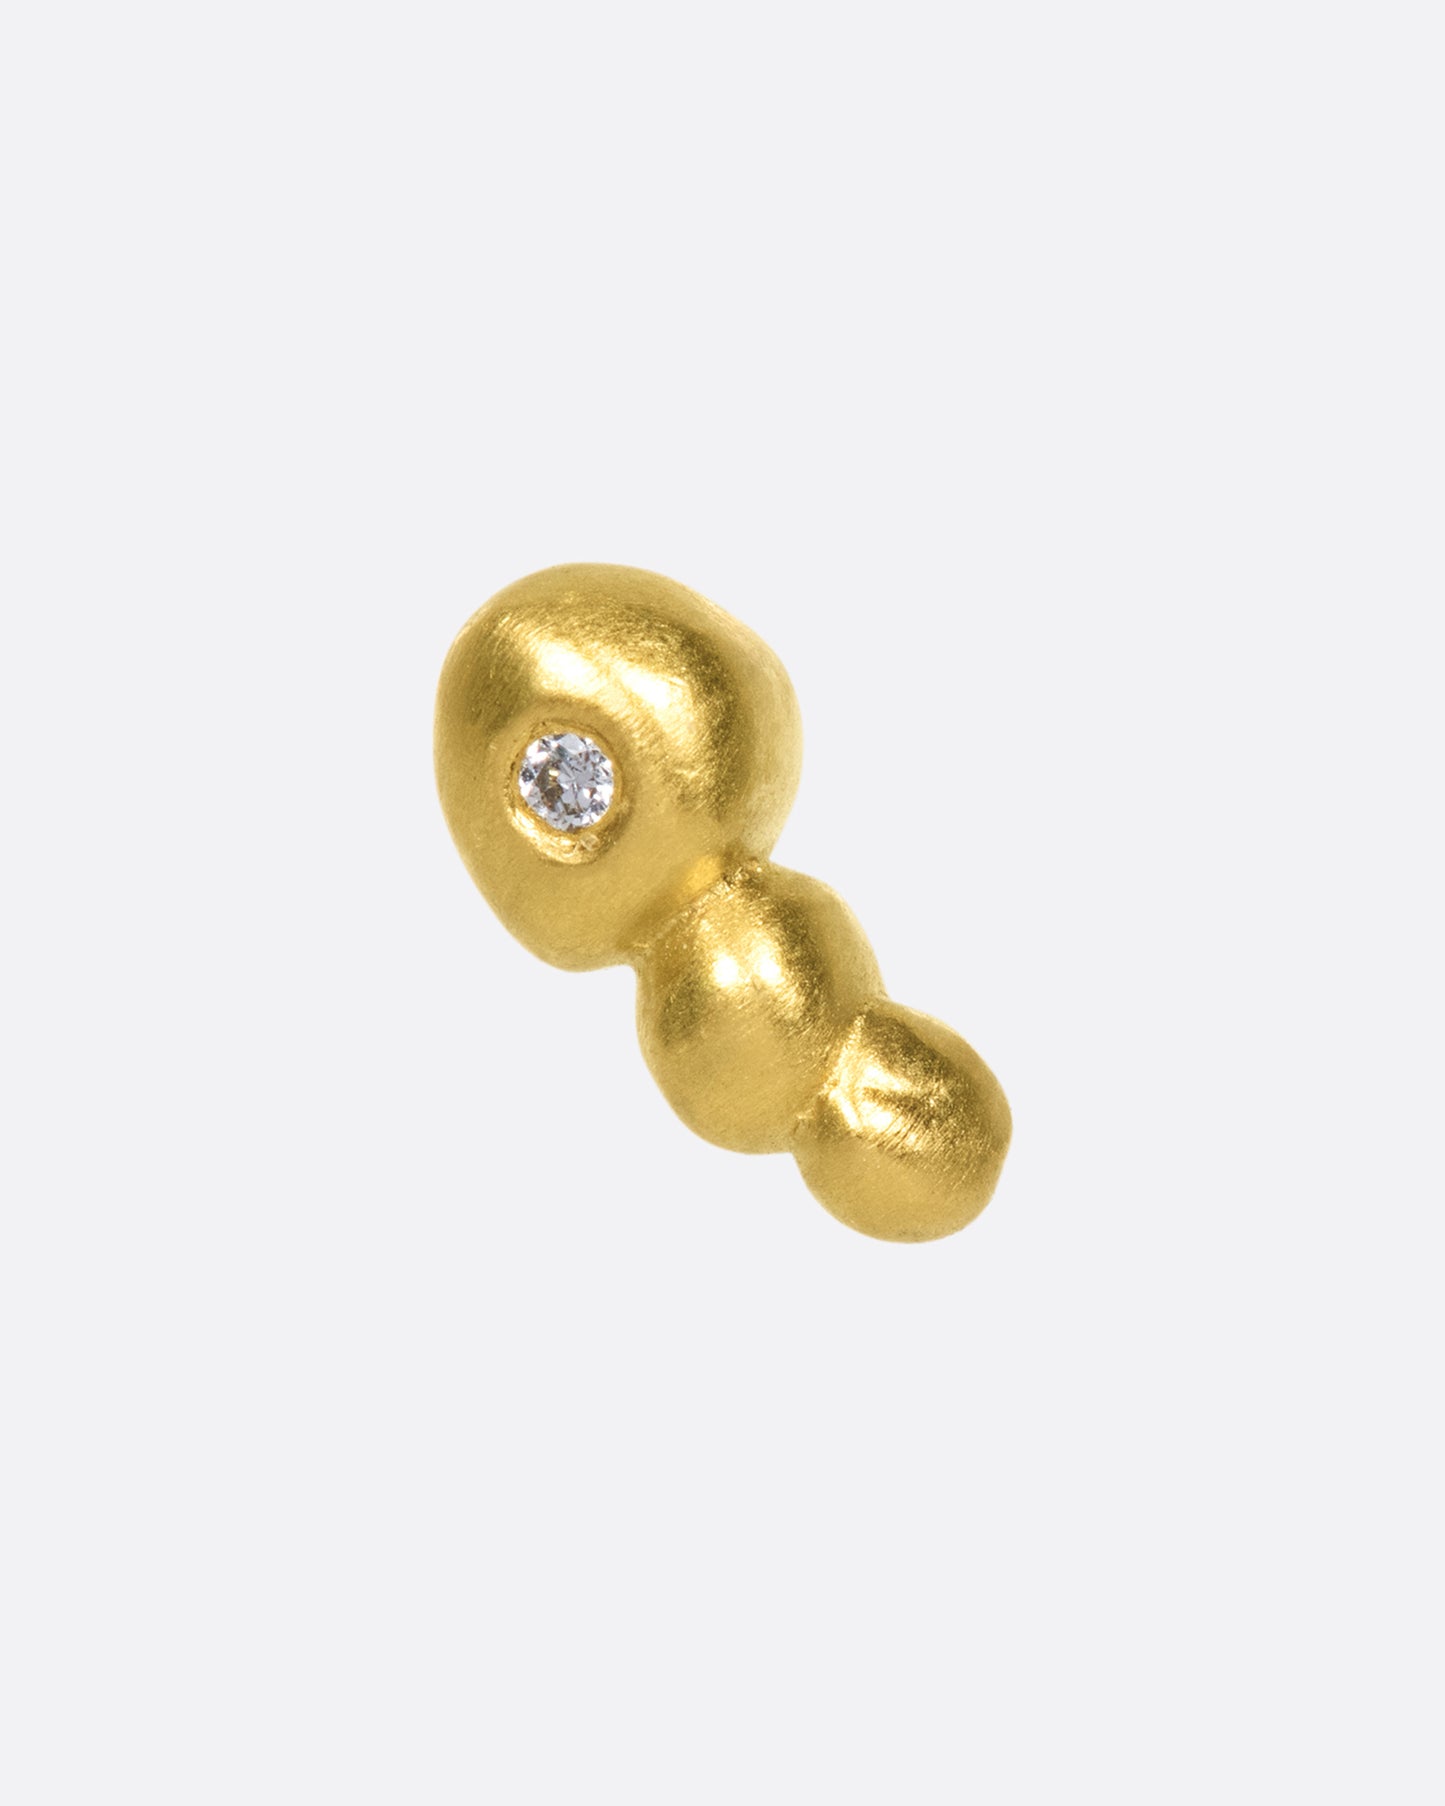 This high karat gold stud is perfect to tuck into little curves in the ear.